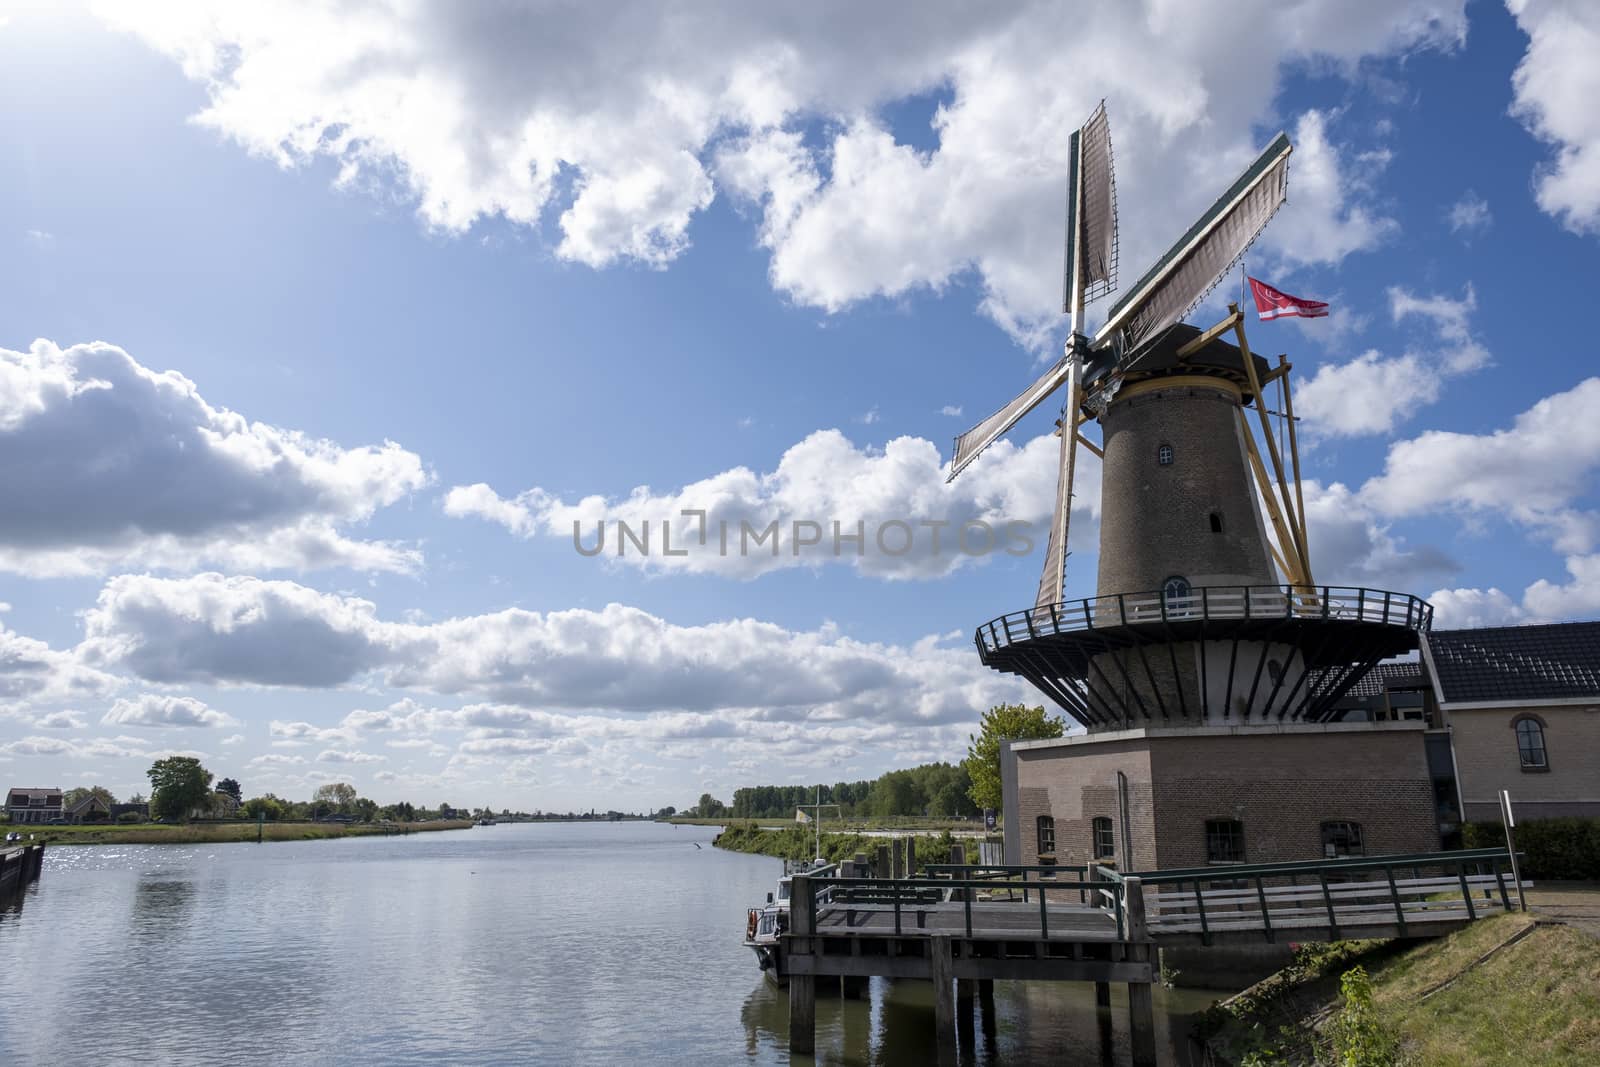 Traditional setting of the historical dutch windmills landscape  by Tjeerdkruse